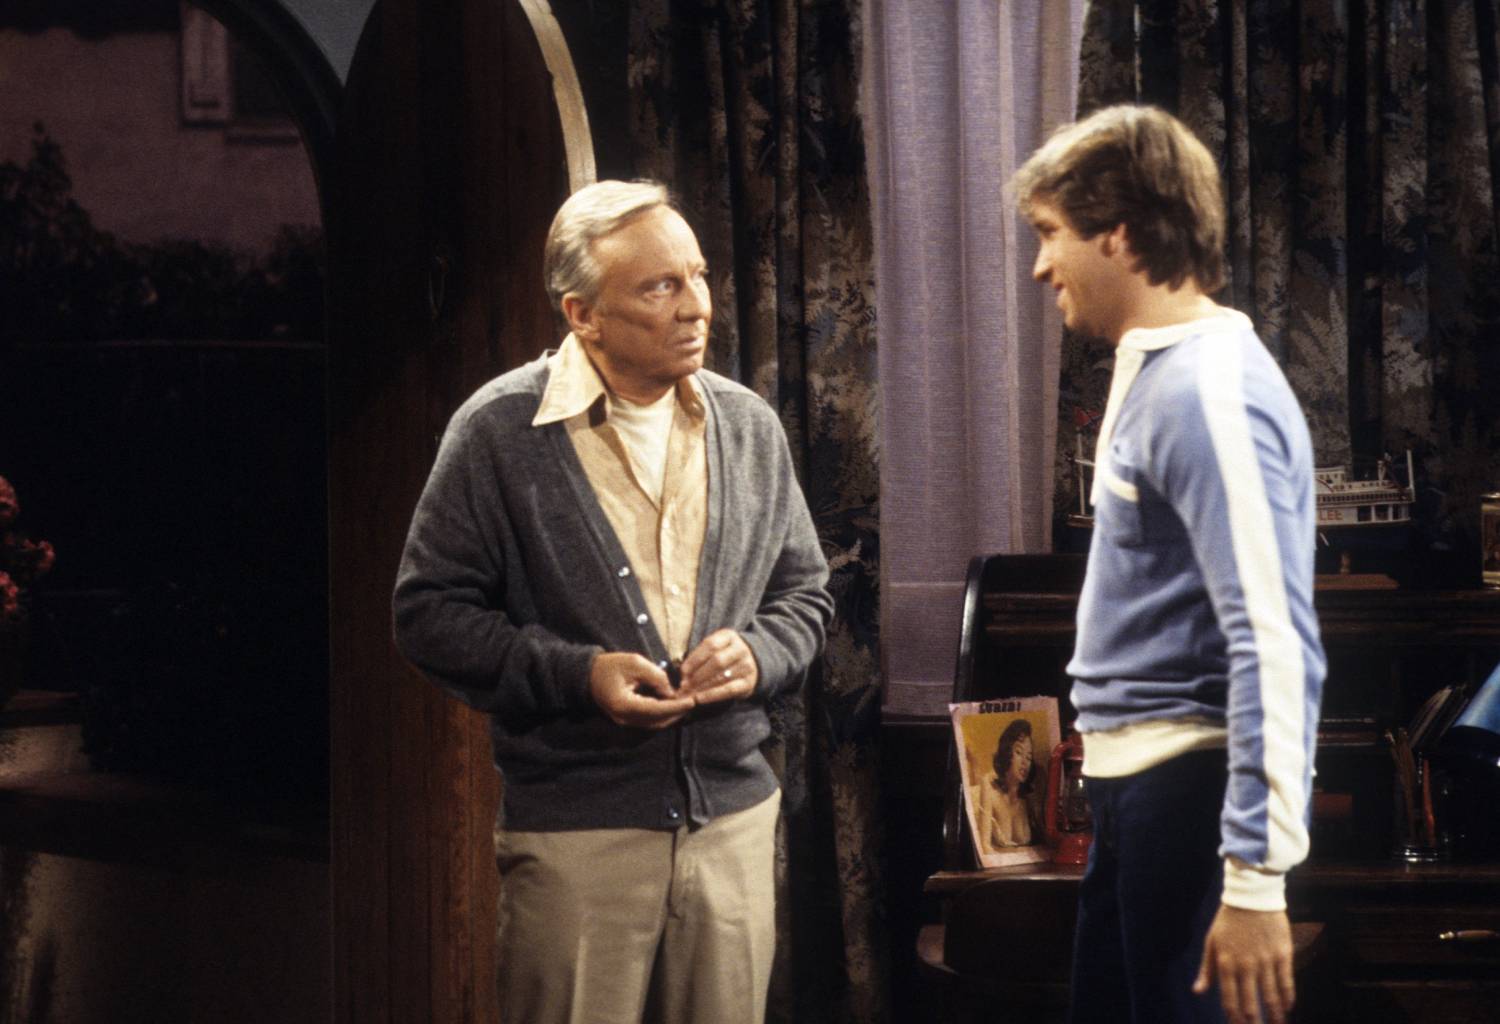 THREE'S COMPANY - "Night Of The Ropers" - Airdate: March 17, 1981